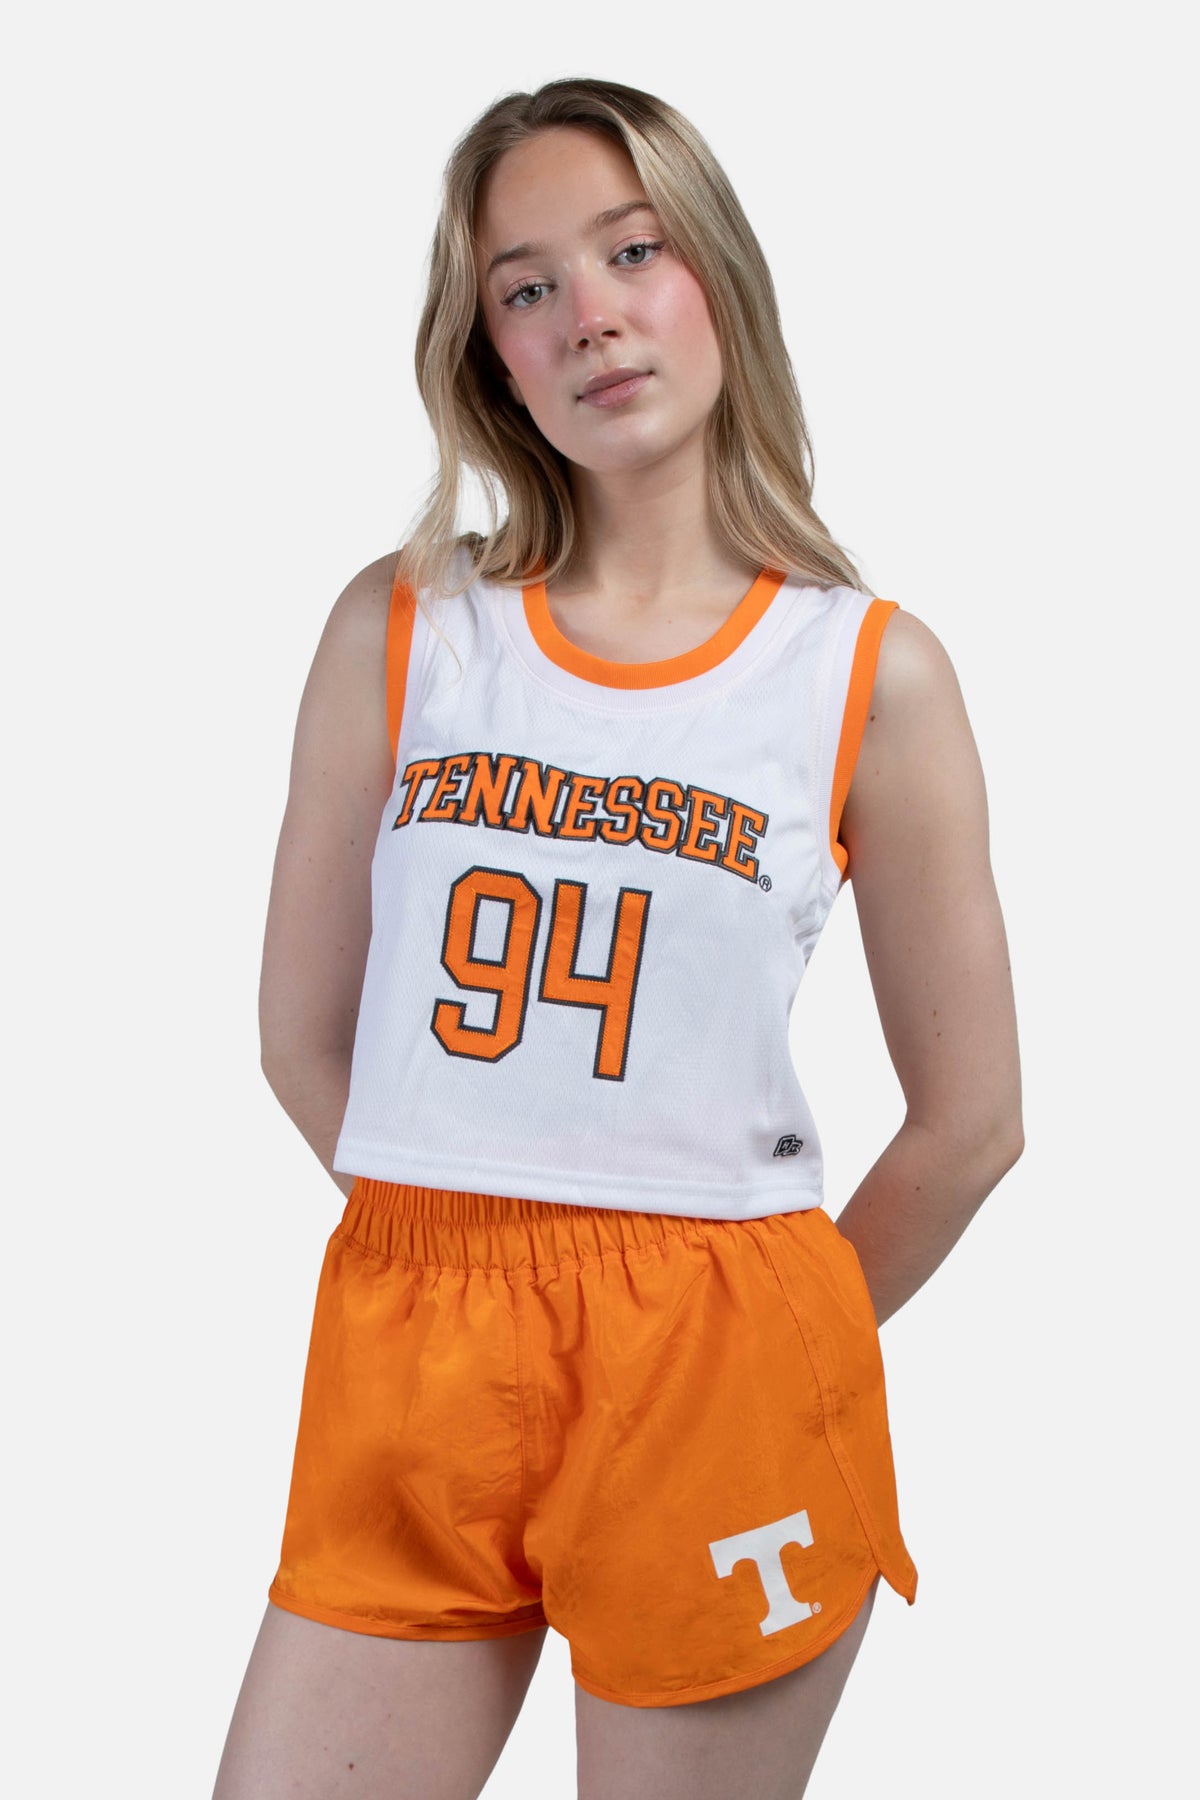 University of Tennessee Basketball Top